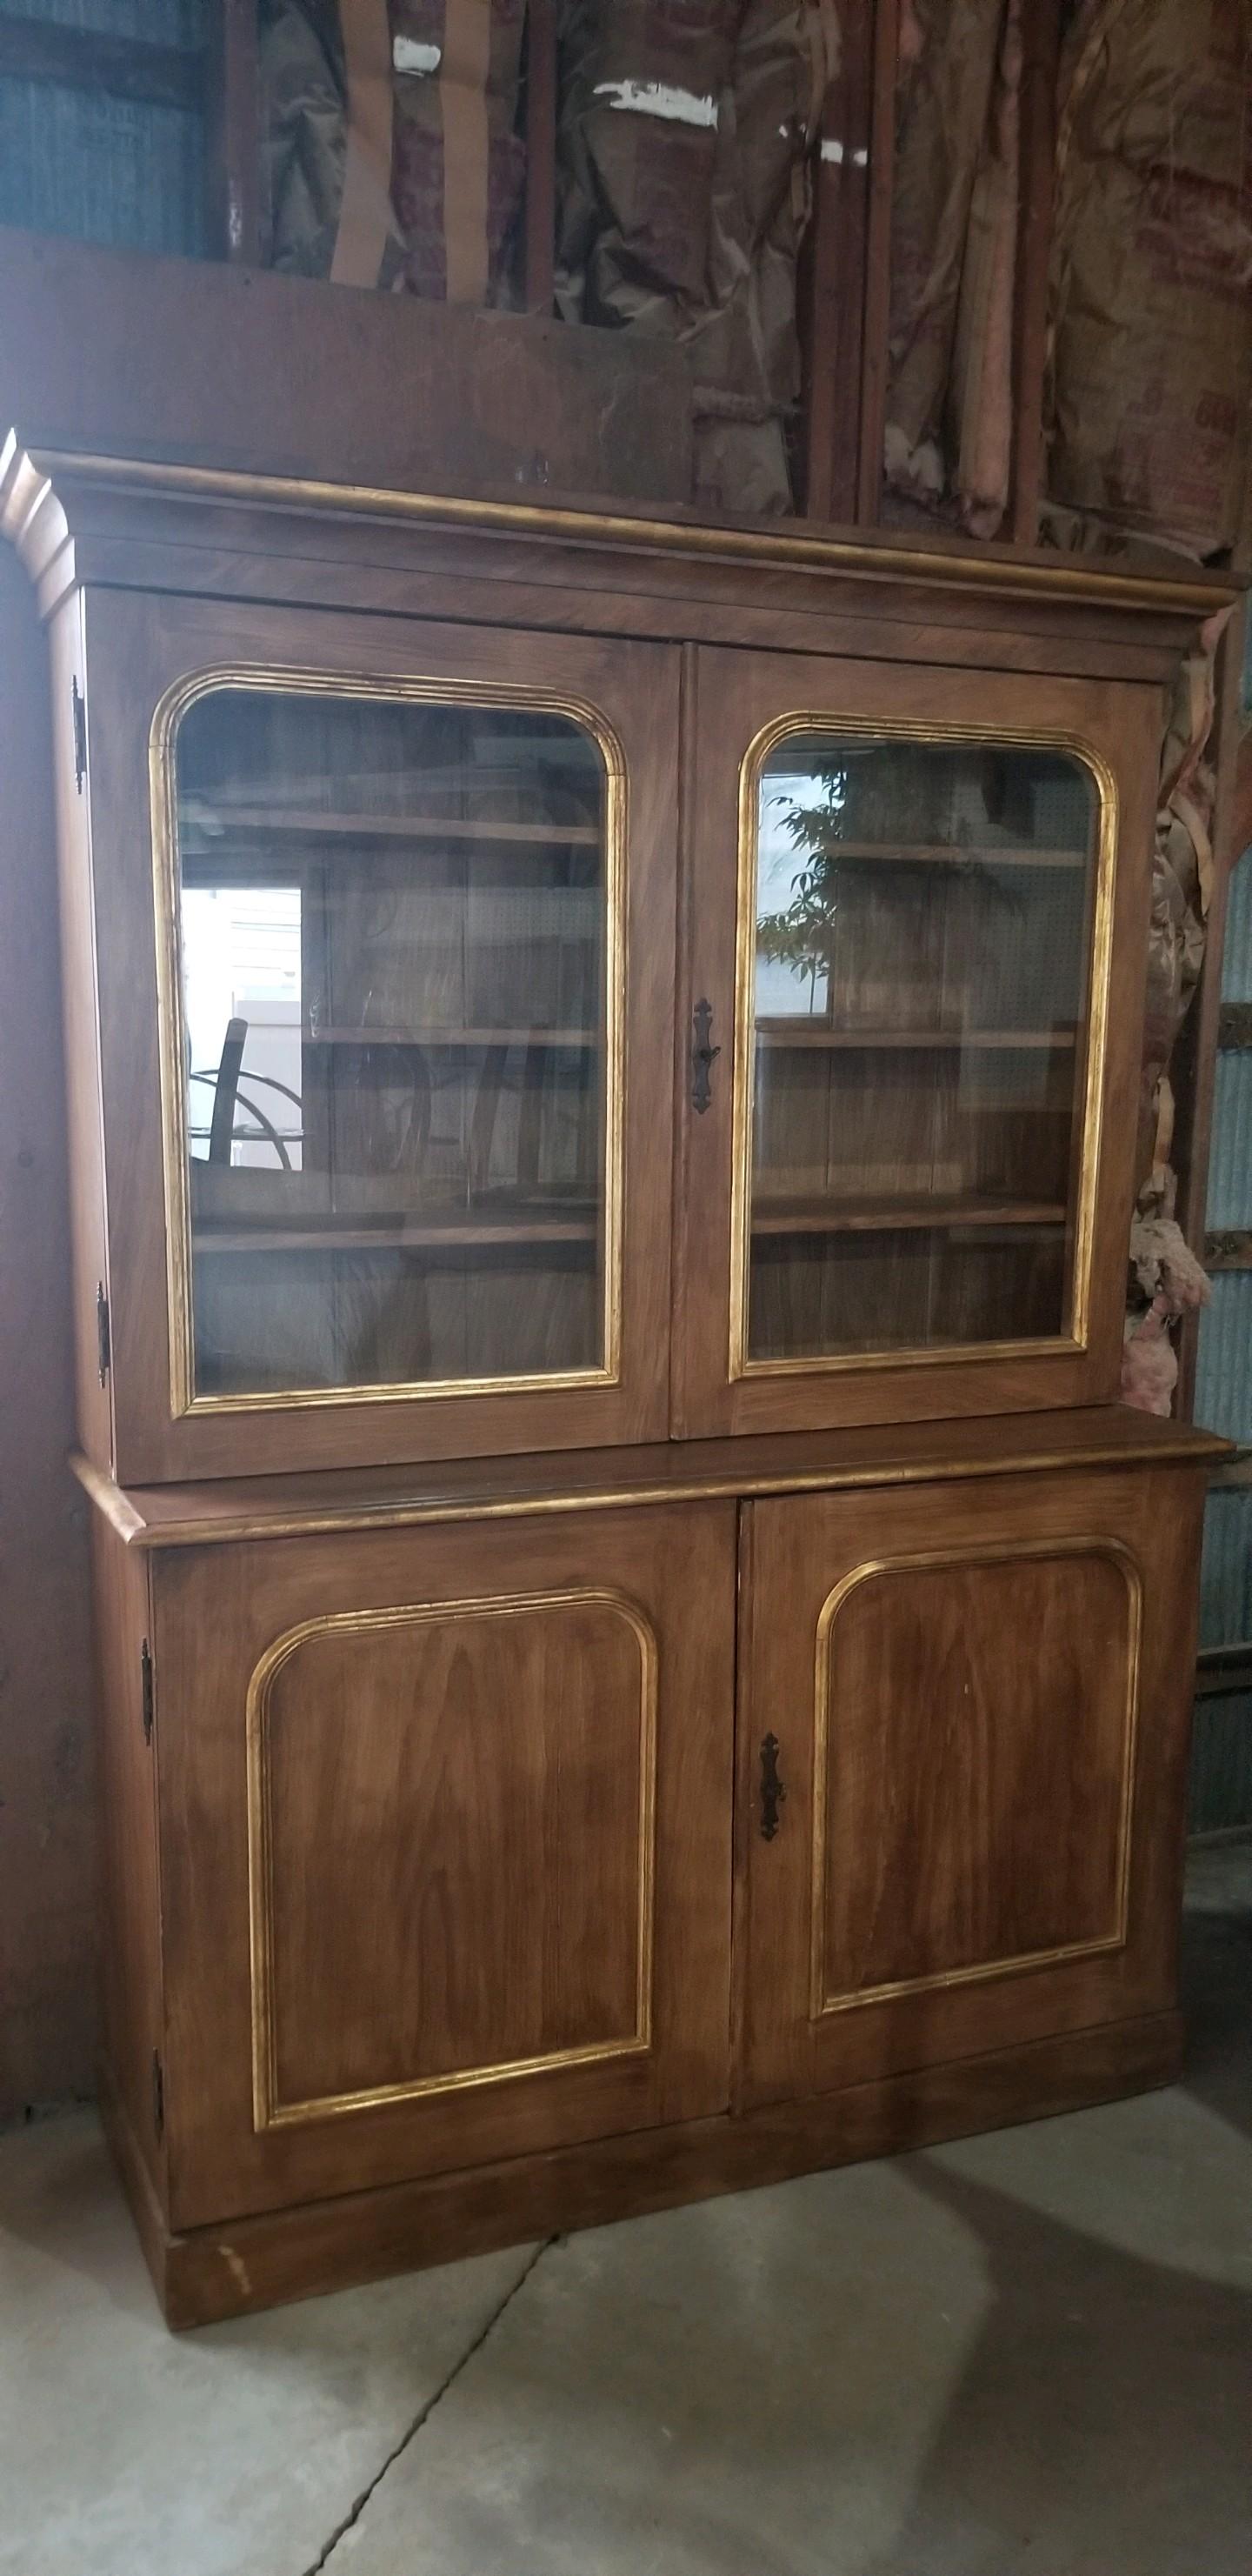 I found this wonderful cupboard in Scotland on a buying trip for a client. It has a wonderful faux bois (grain), and a unique golden leaf edging that I believe was a later embellishment. Once this cupboard hit the other side of the pond, it traveled